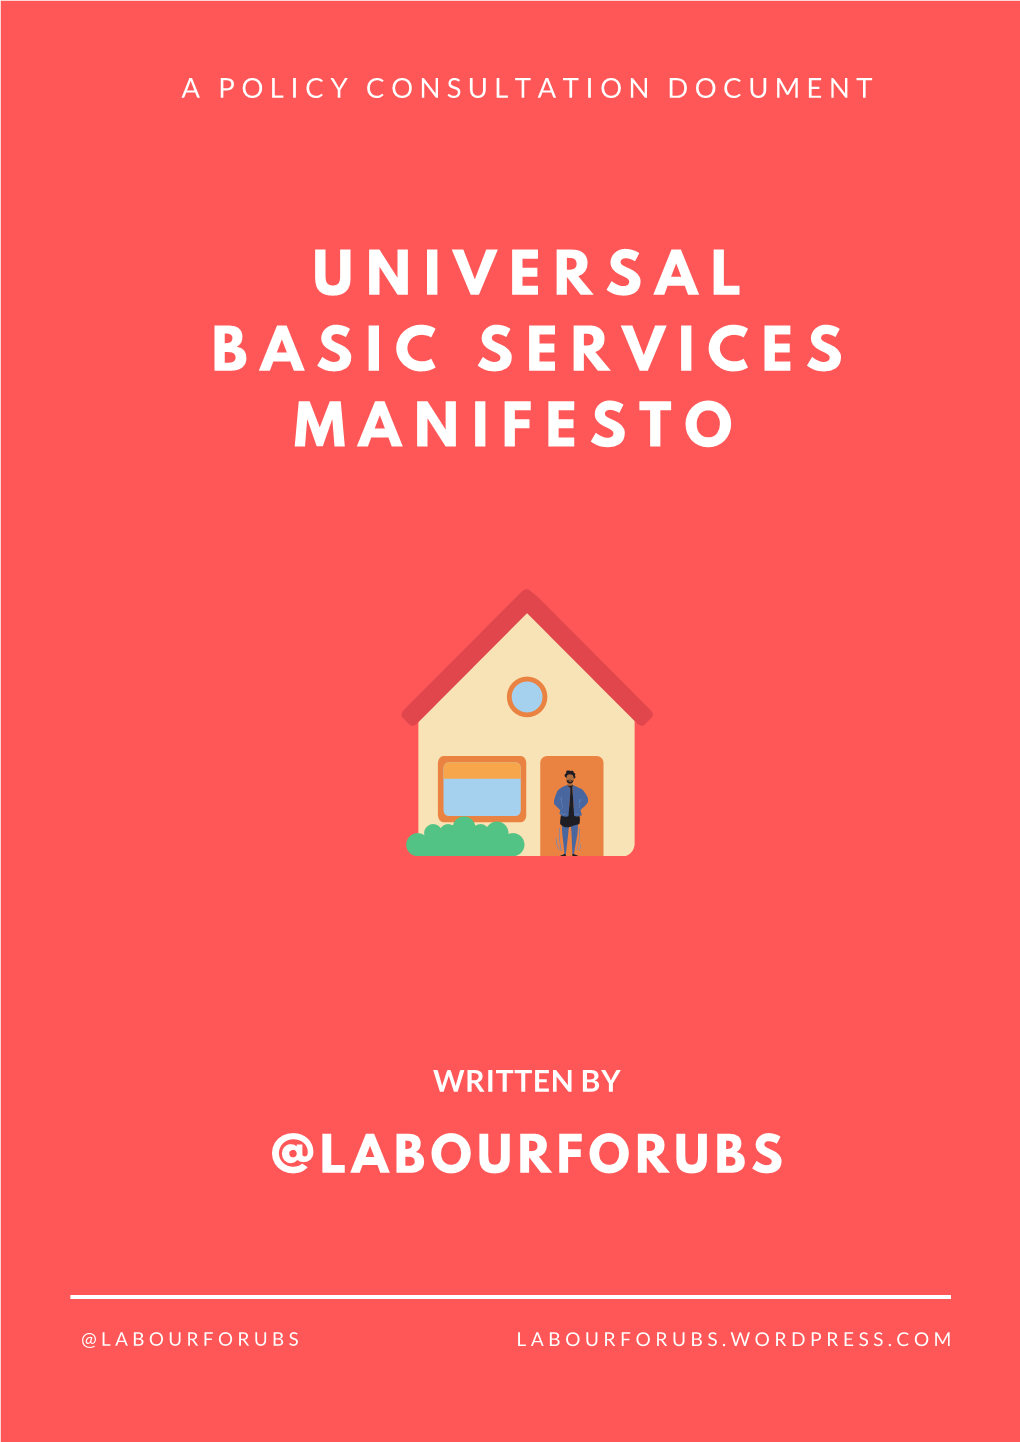 Labour for Ubs Is a Grassroots Campaign for the Adoption of Universal Basic Services in Labour's Next Manifesto